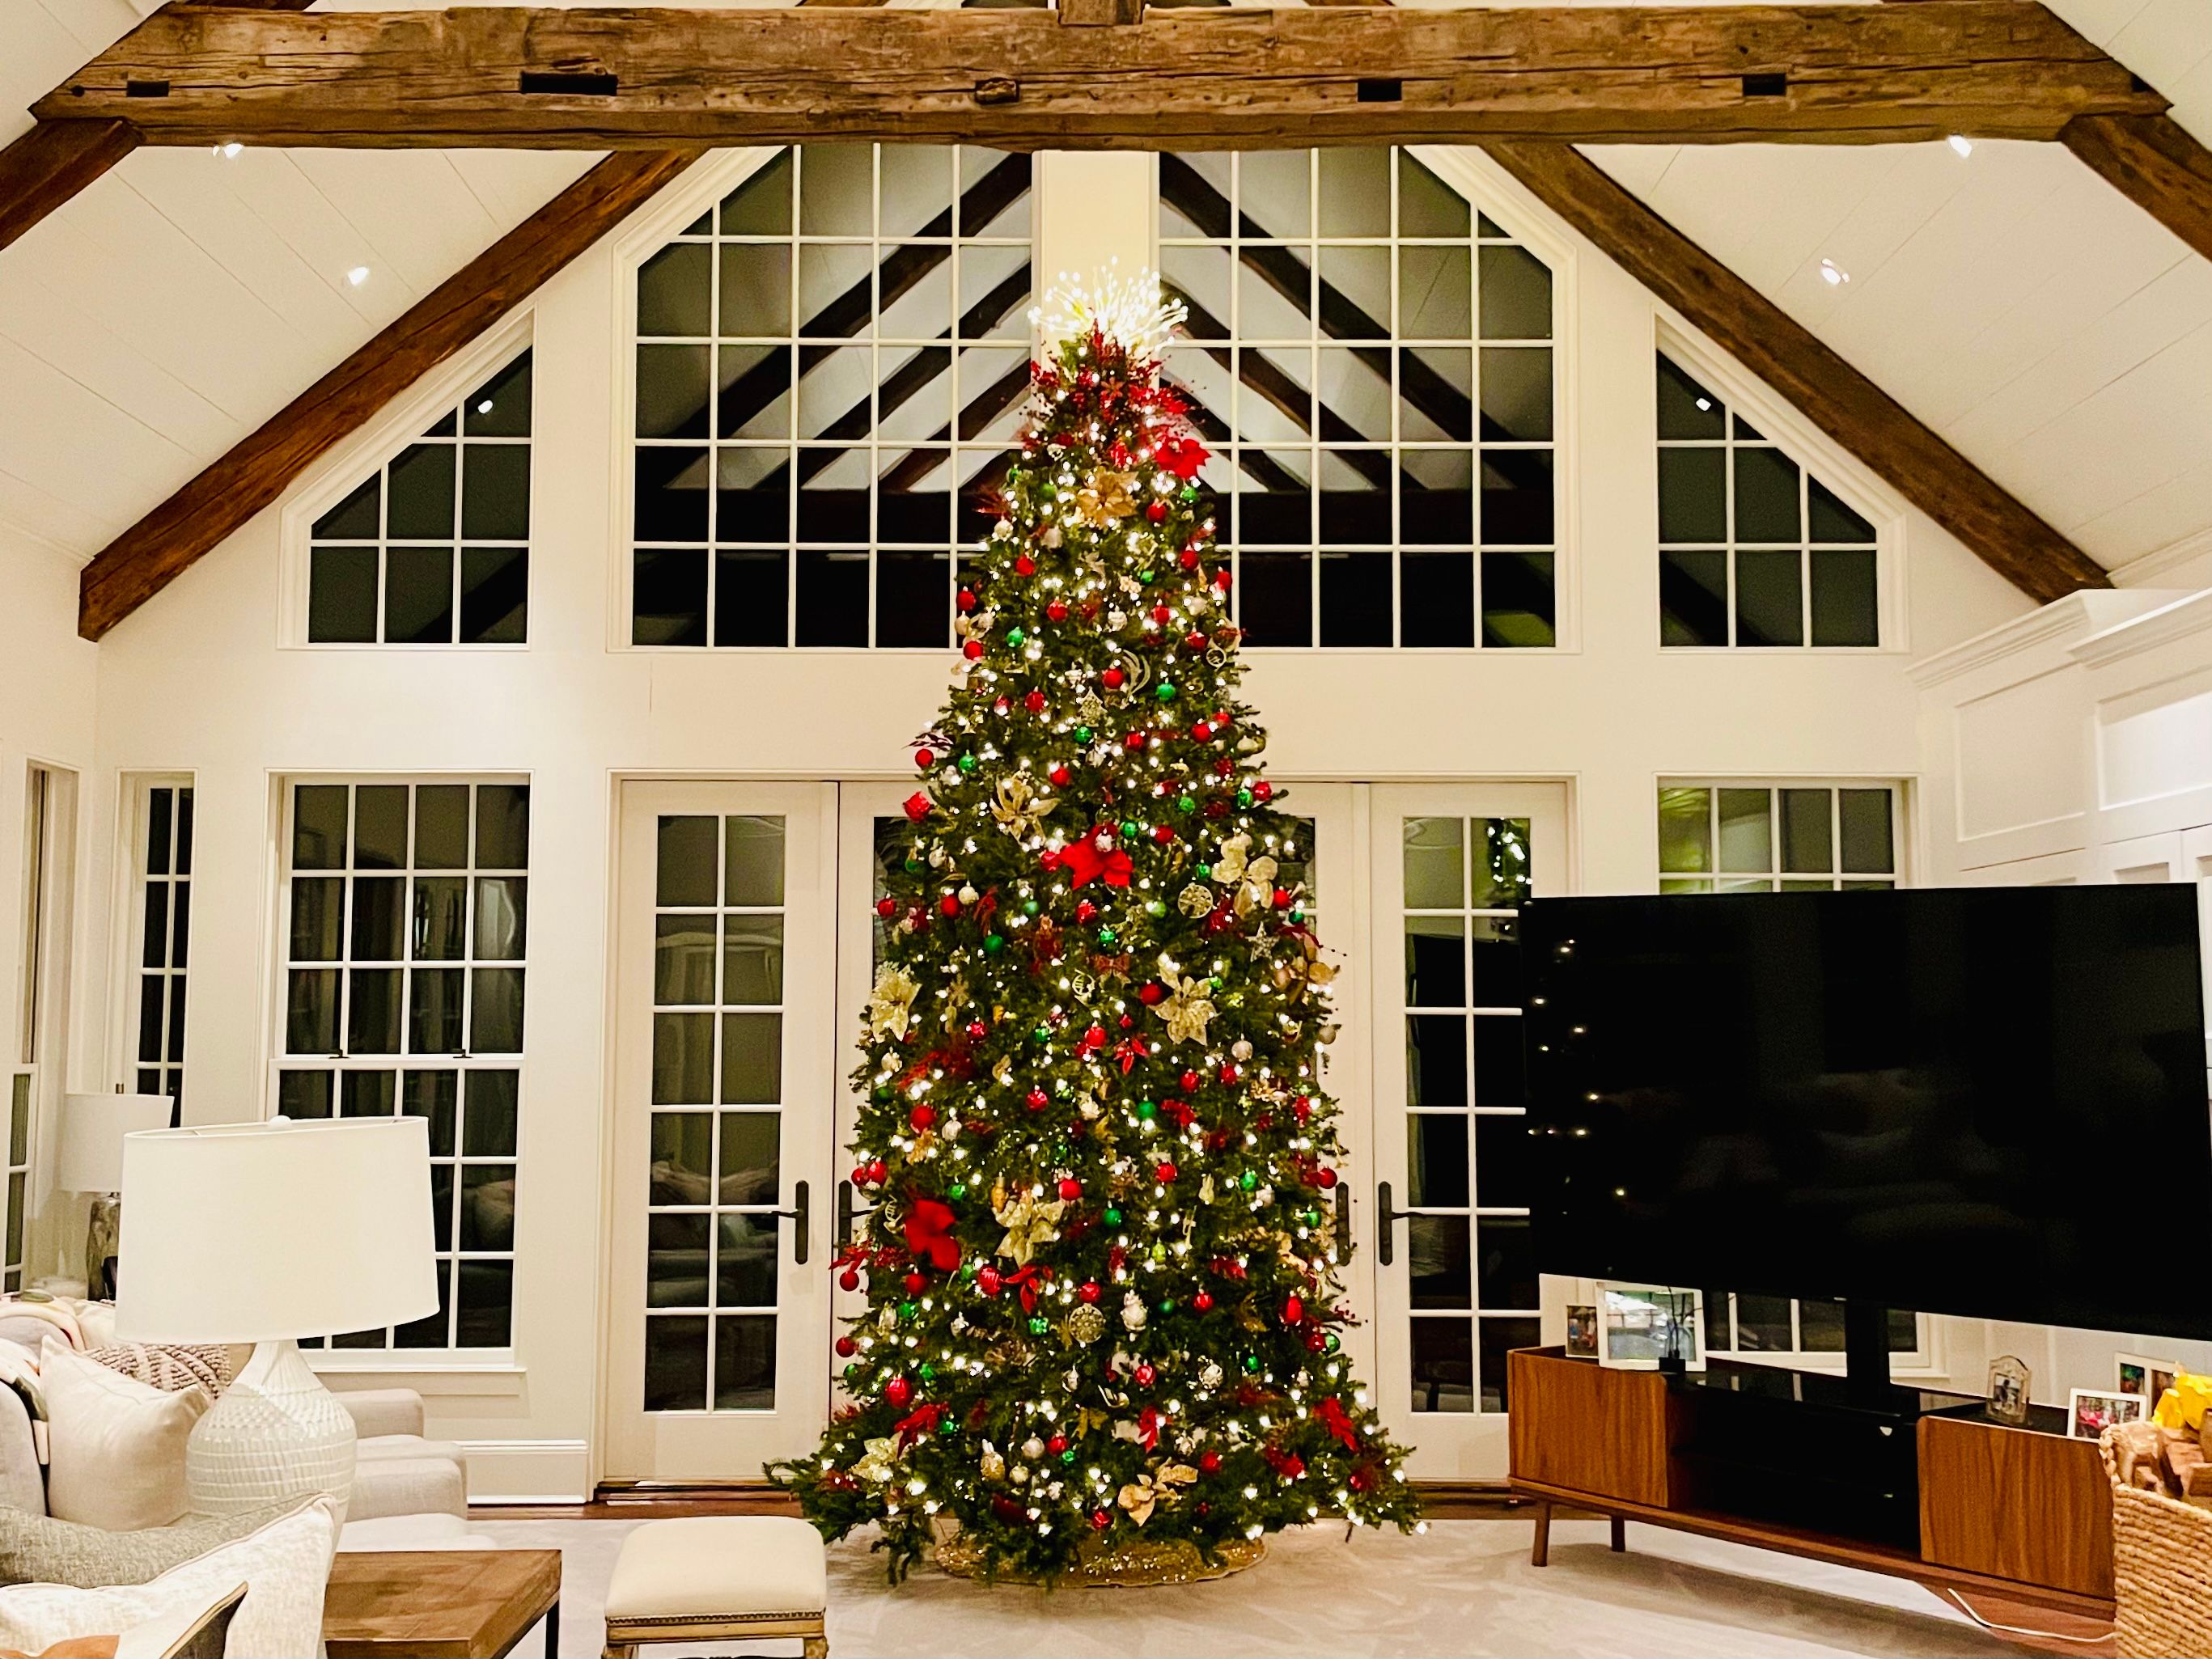 Everything you need to decorate for Christmas | Rent-A-Christmas